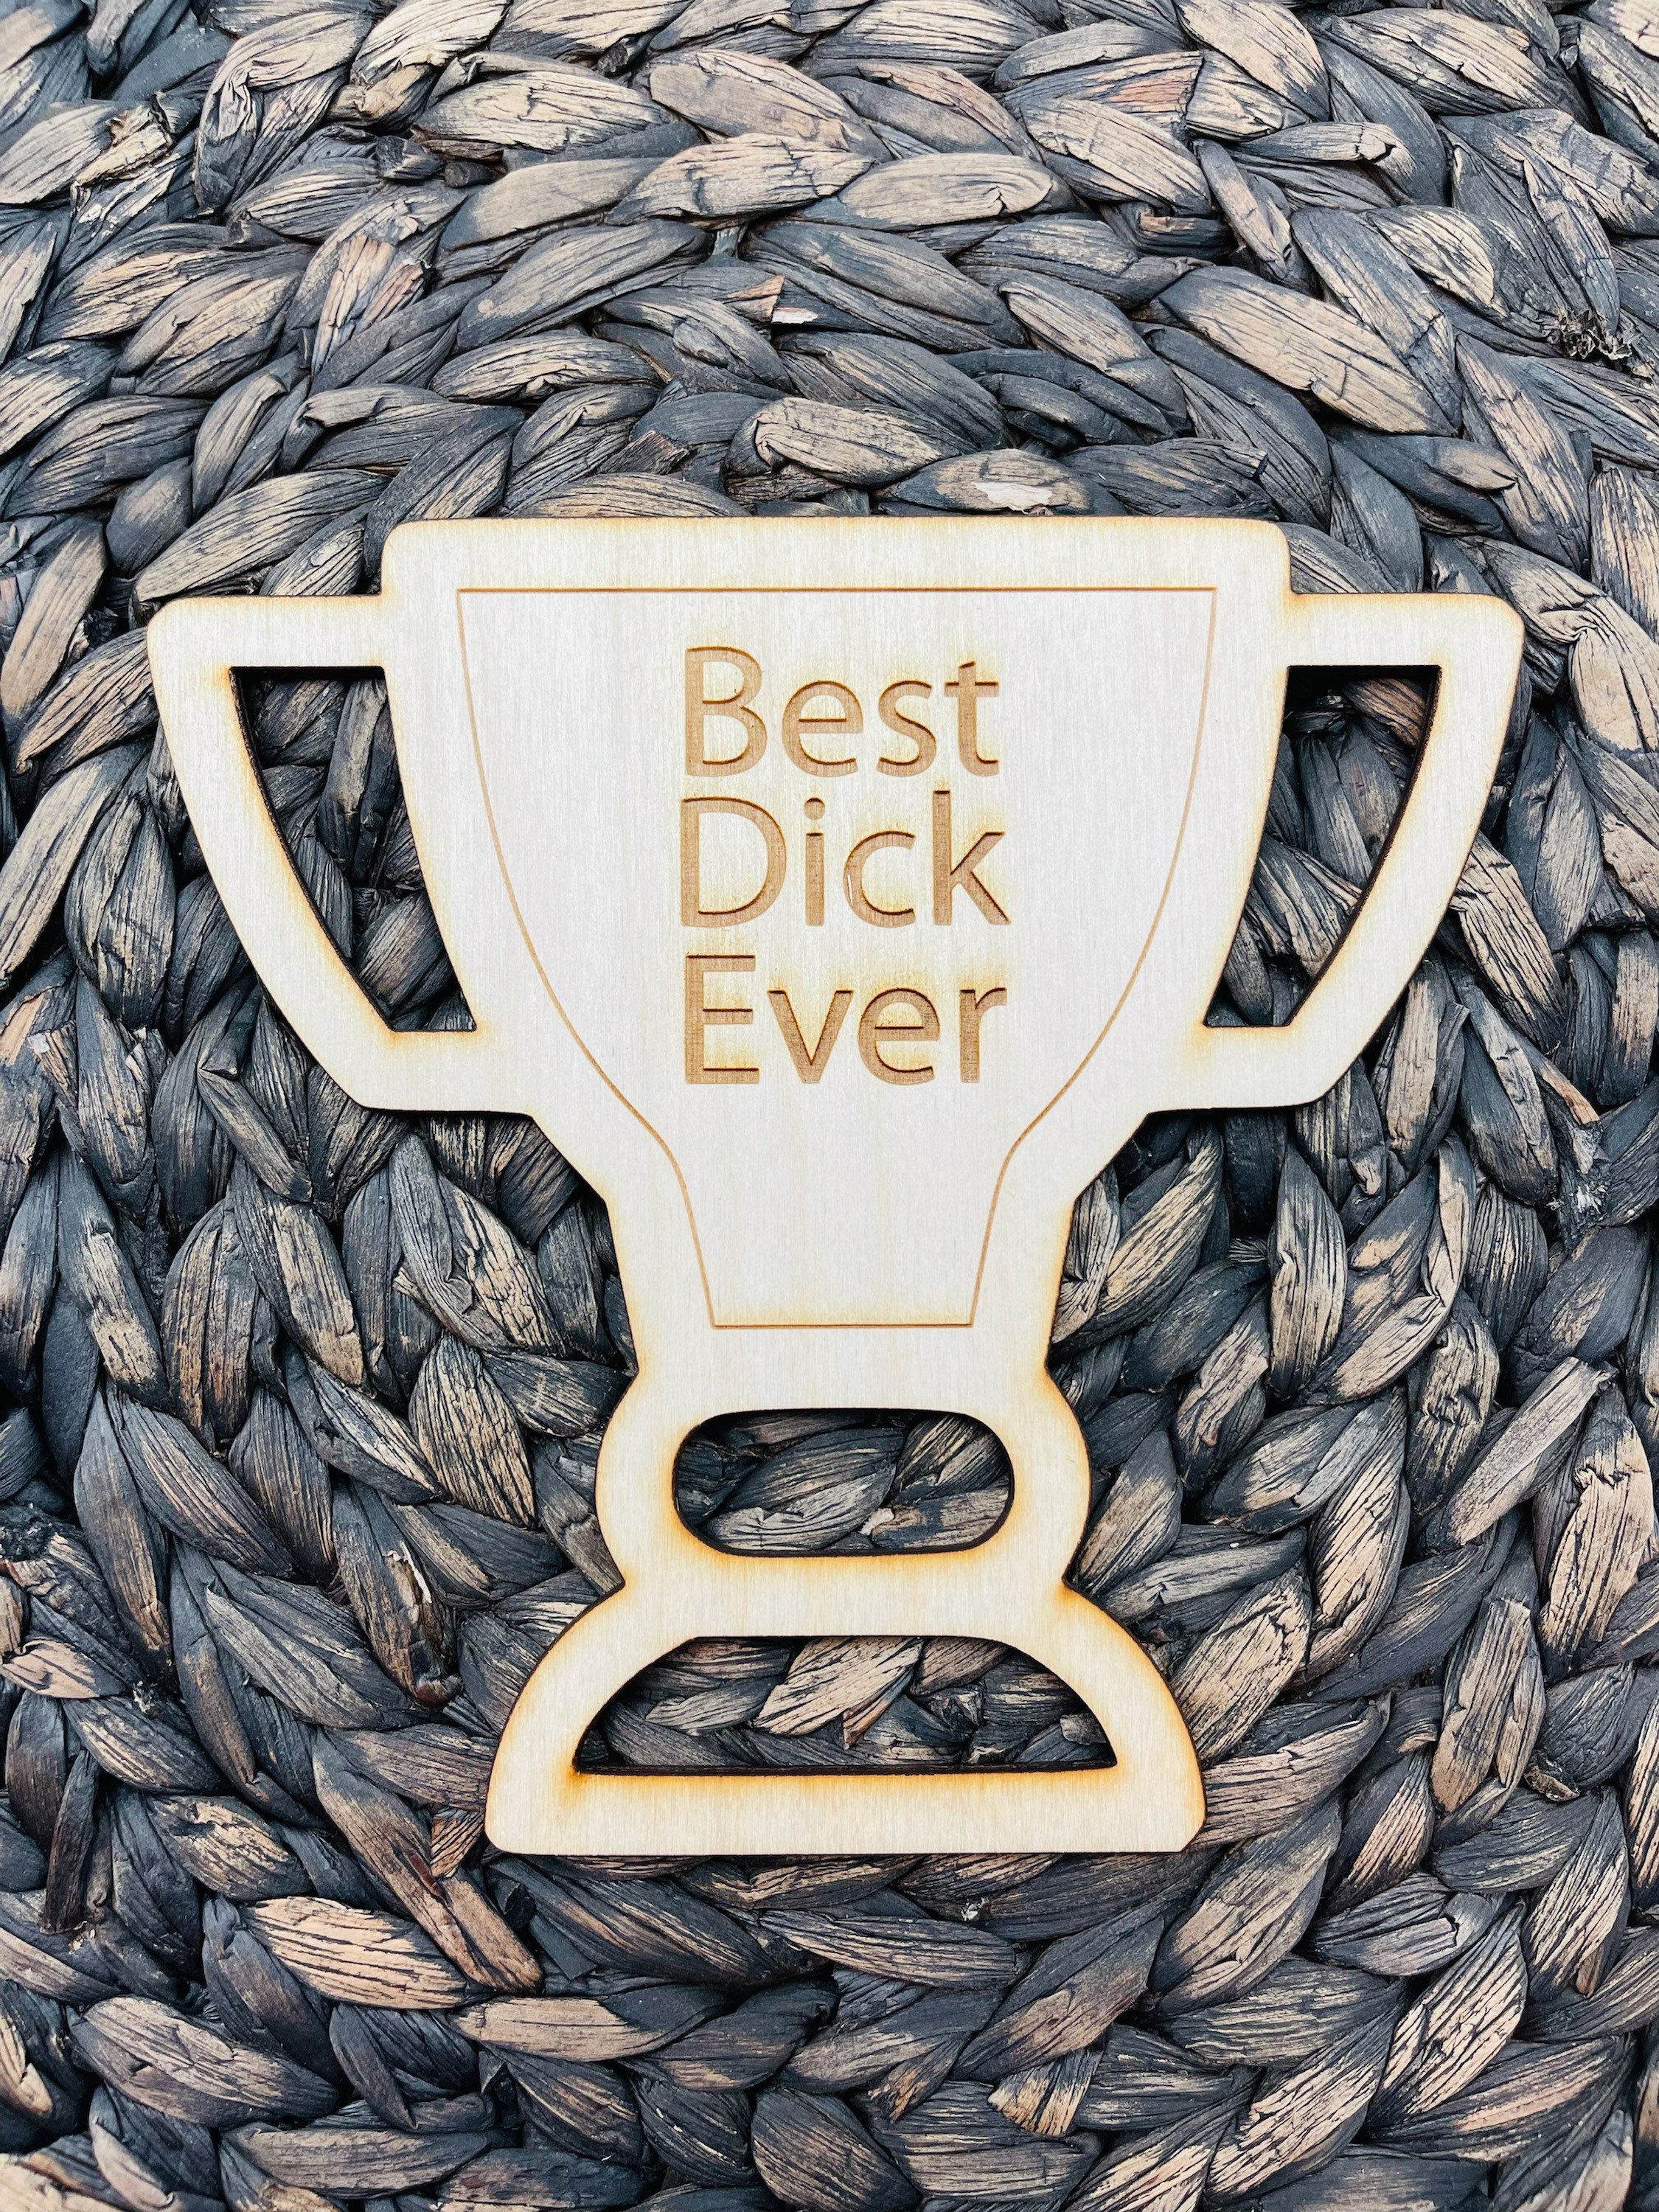 The Best Dick Ever video l